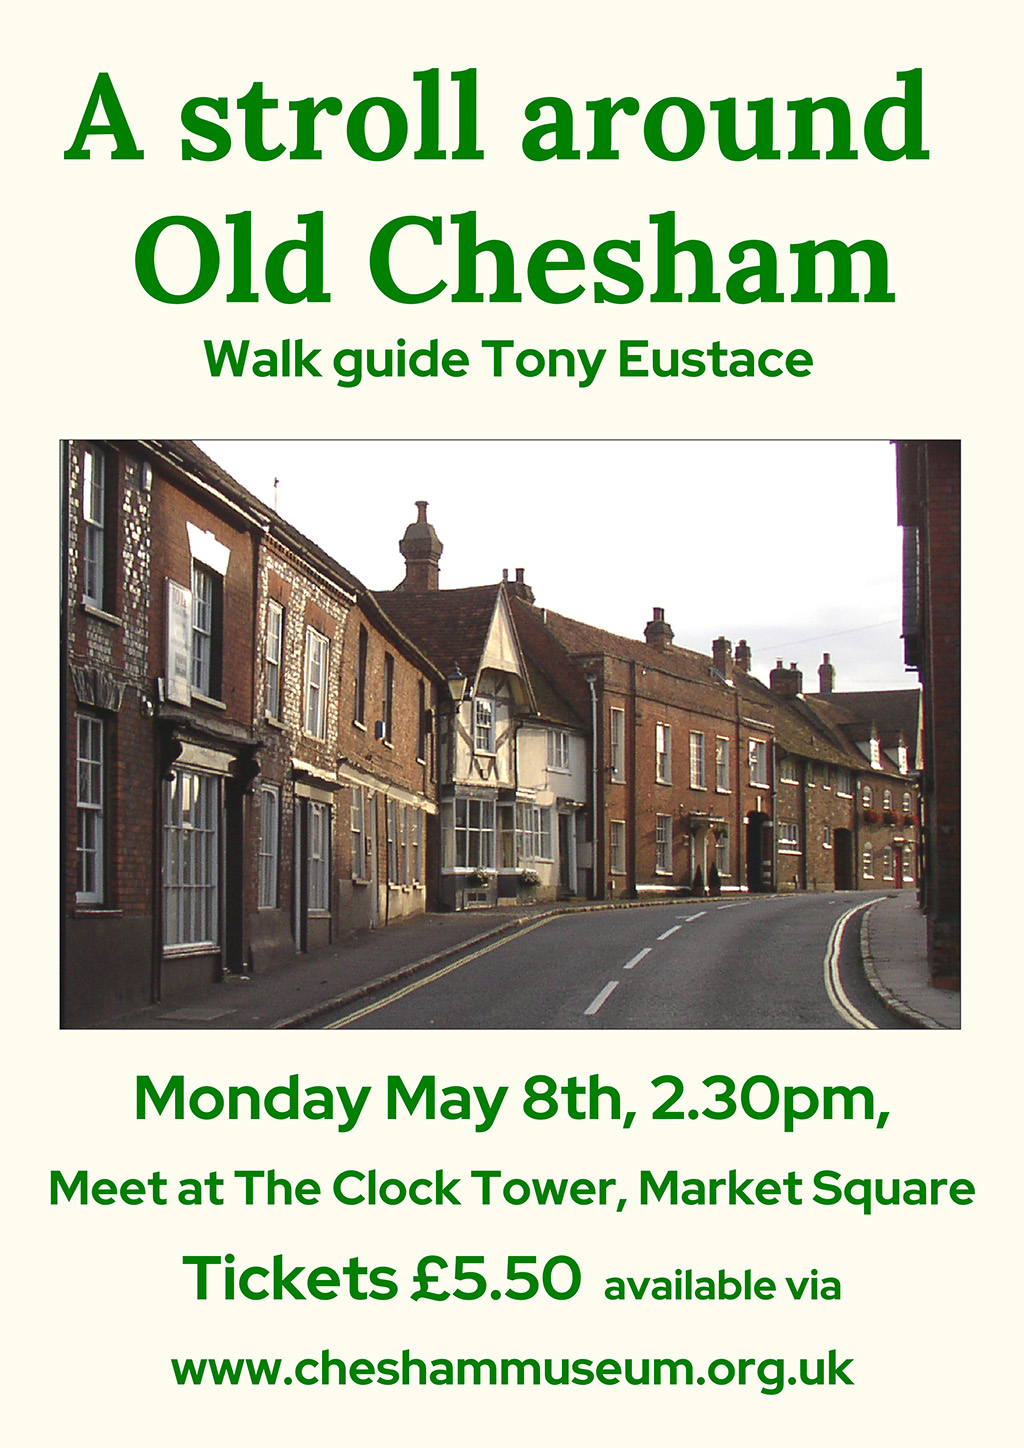 Poster showing a stroll around old Chesham and a photo of a street in Chesham